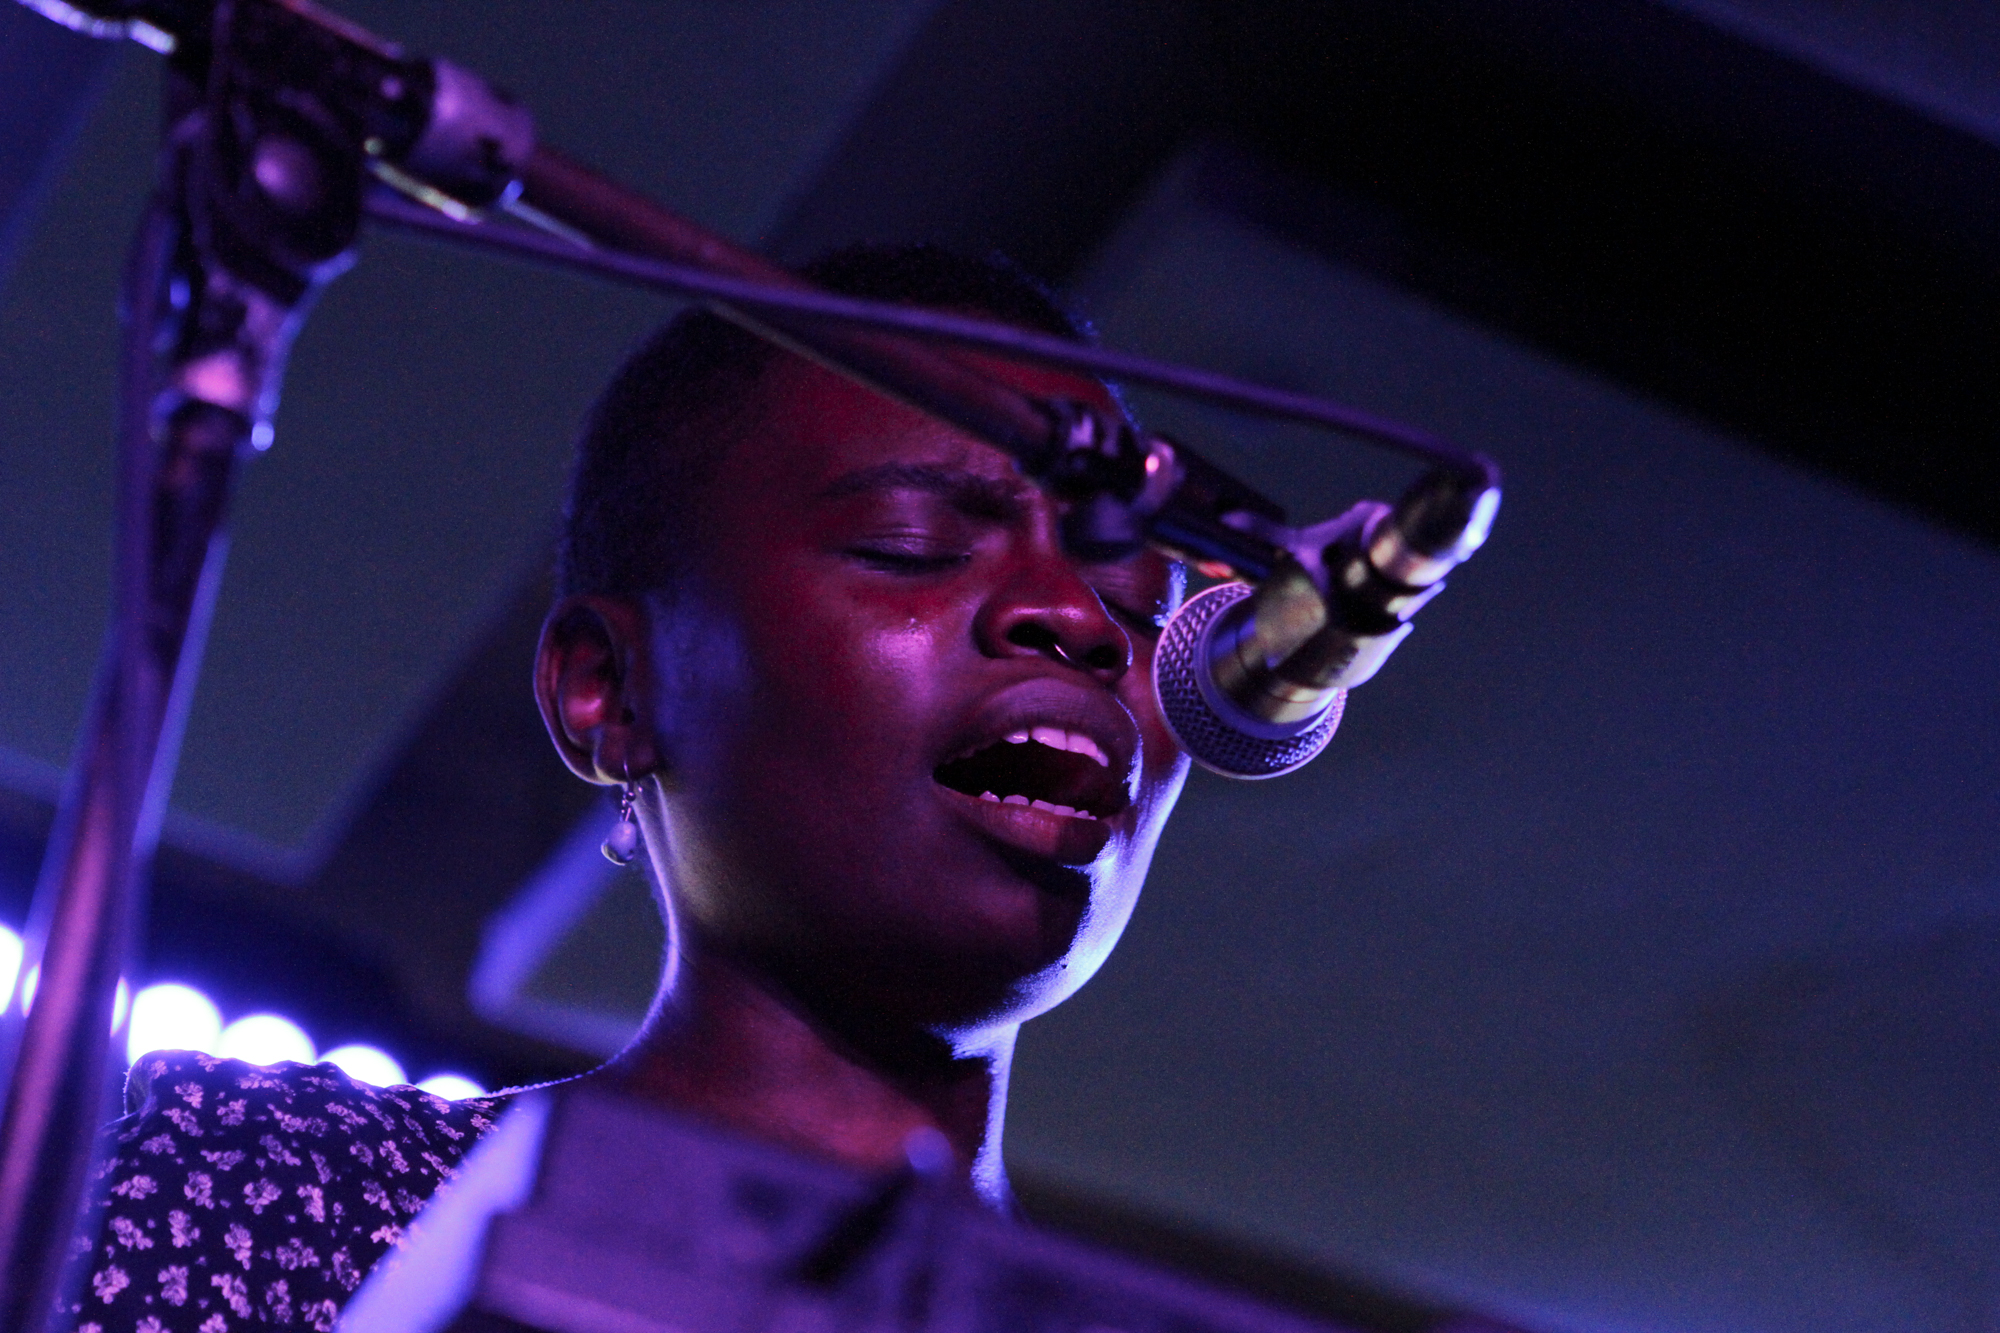 Vagabon plays at Baby's All Right in Brooklyn, NY on Dec. 13, 2016. (© Michael Katzif - Do not use or republish without prior consent.)